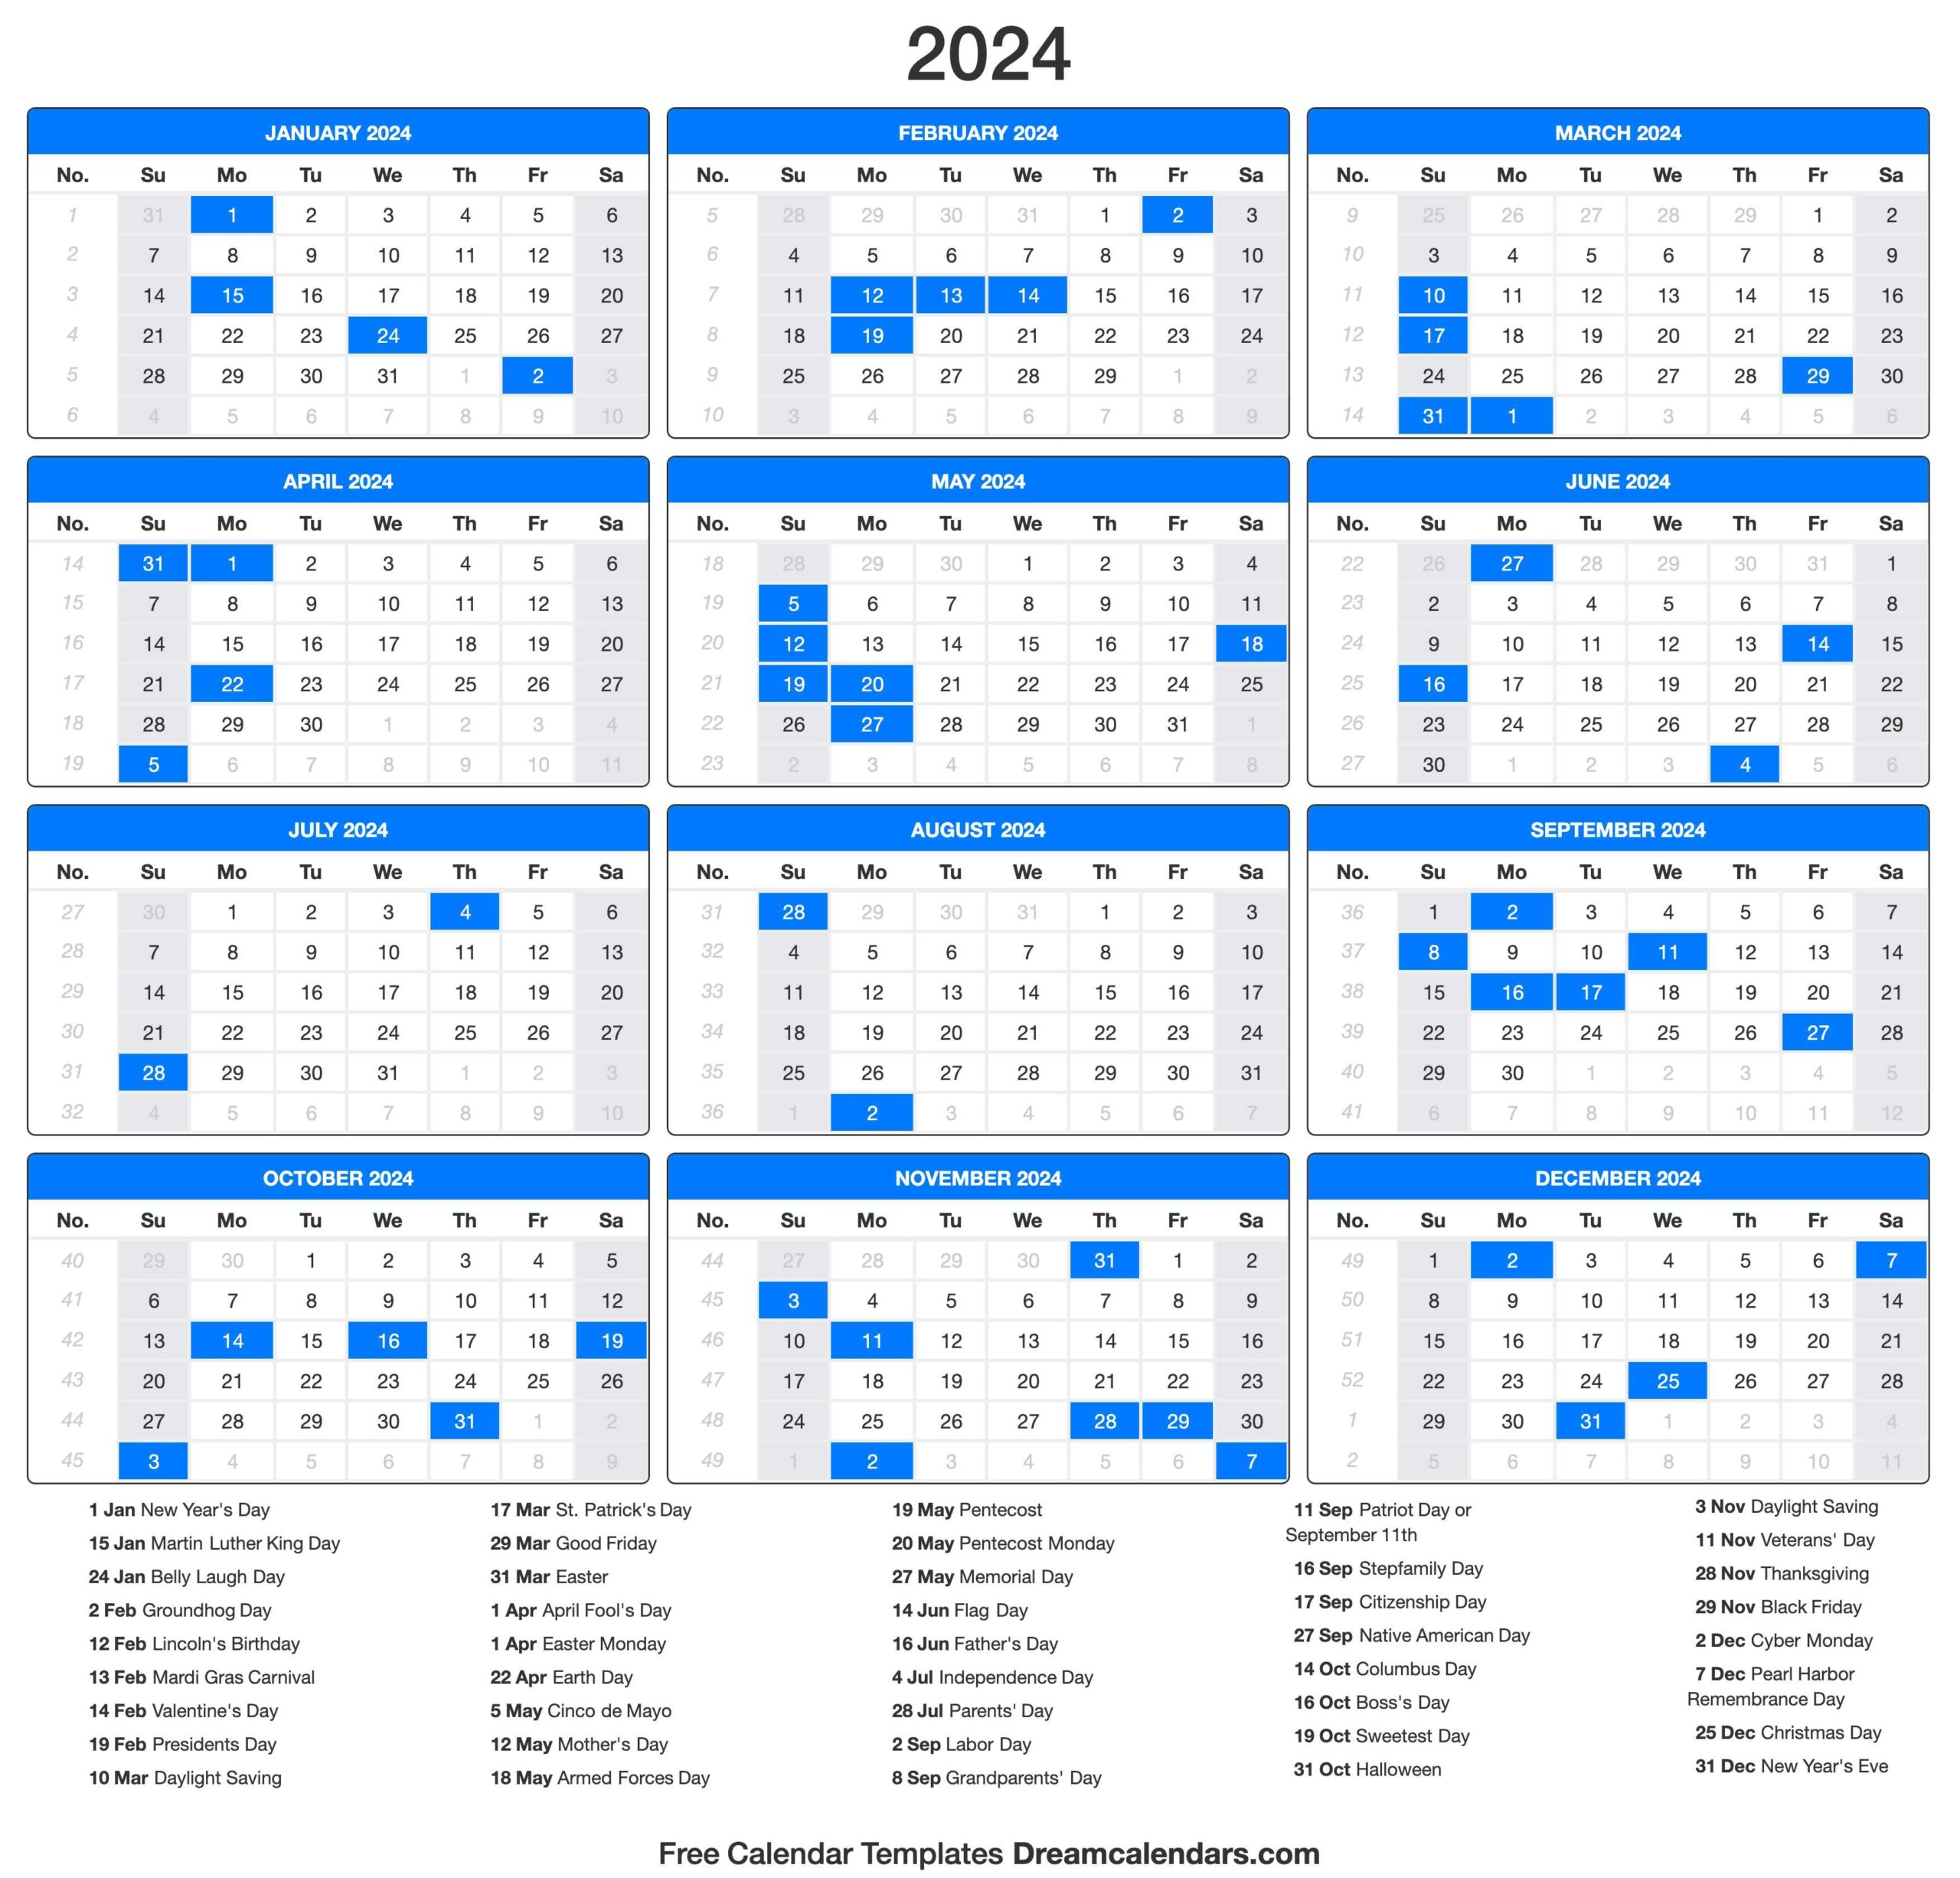 2024 Calendar - Free Printable 2024 Calendar On One Page With Holidays